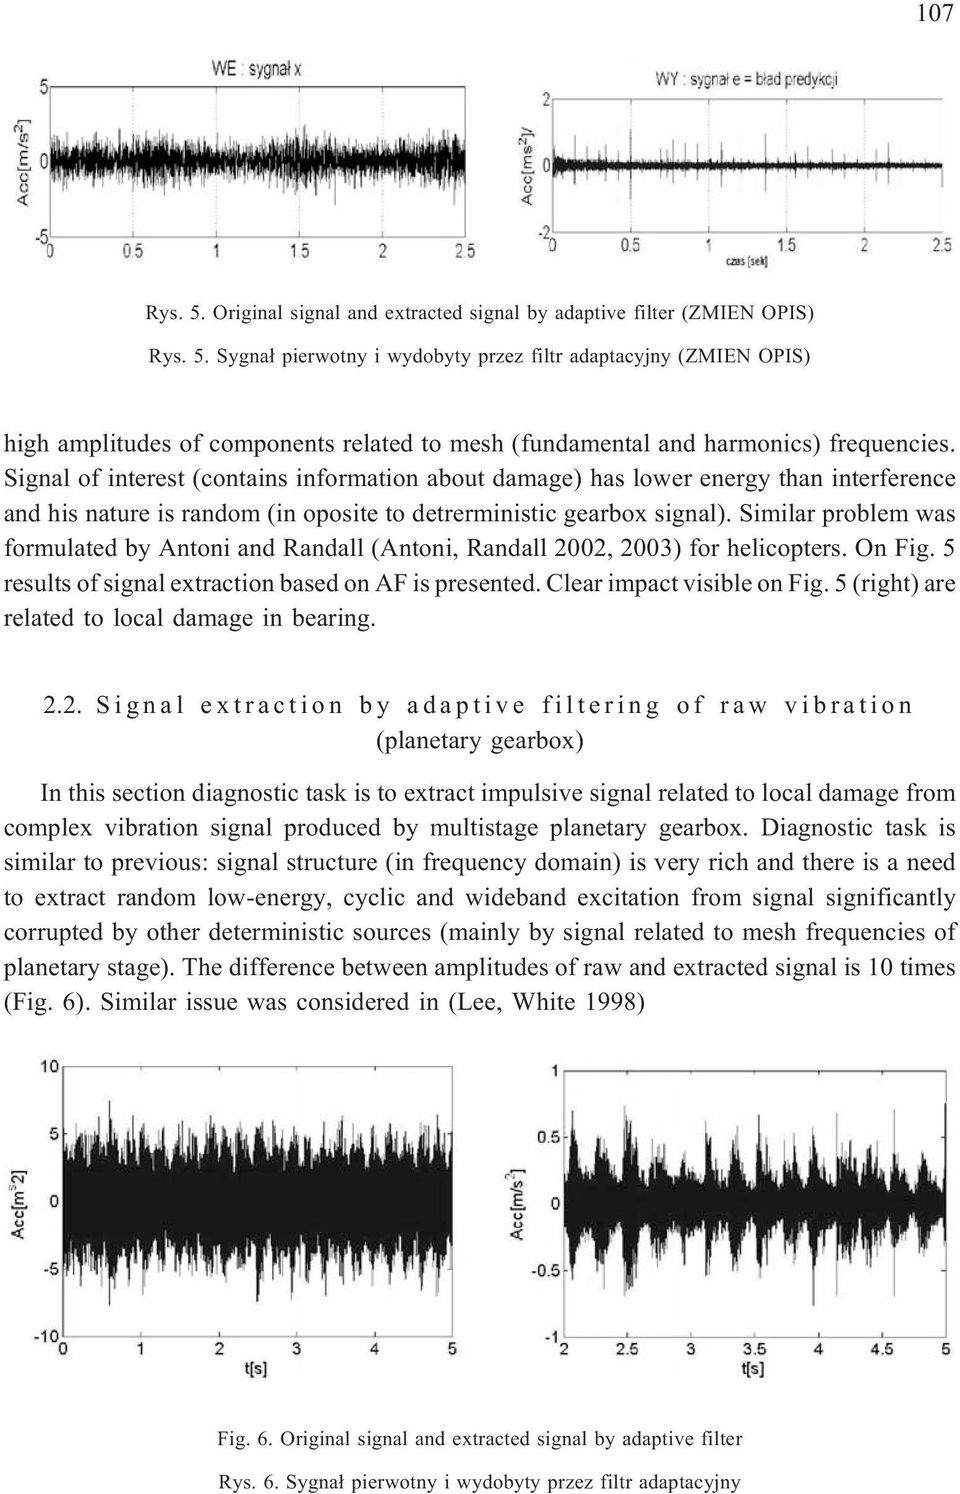 Similar problem was formulated by Antoni and Randall (Antoni, Randall 2002, 2003) for helicopters. On Fig. 5 results of signal extraction based on AF is presented. Clear impact visible on Fig.